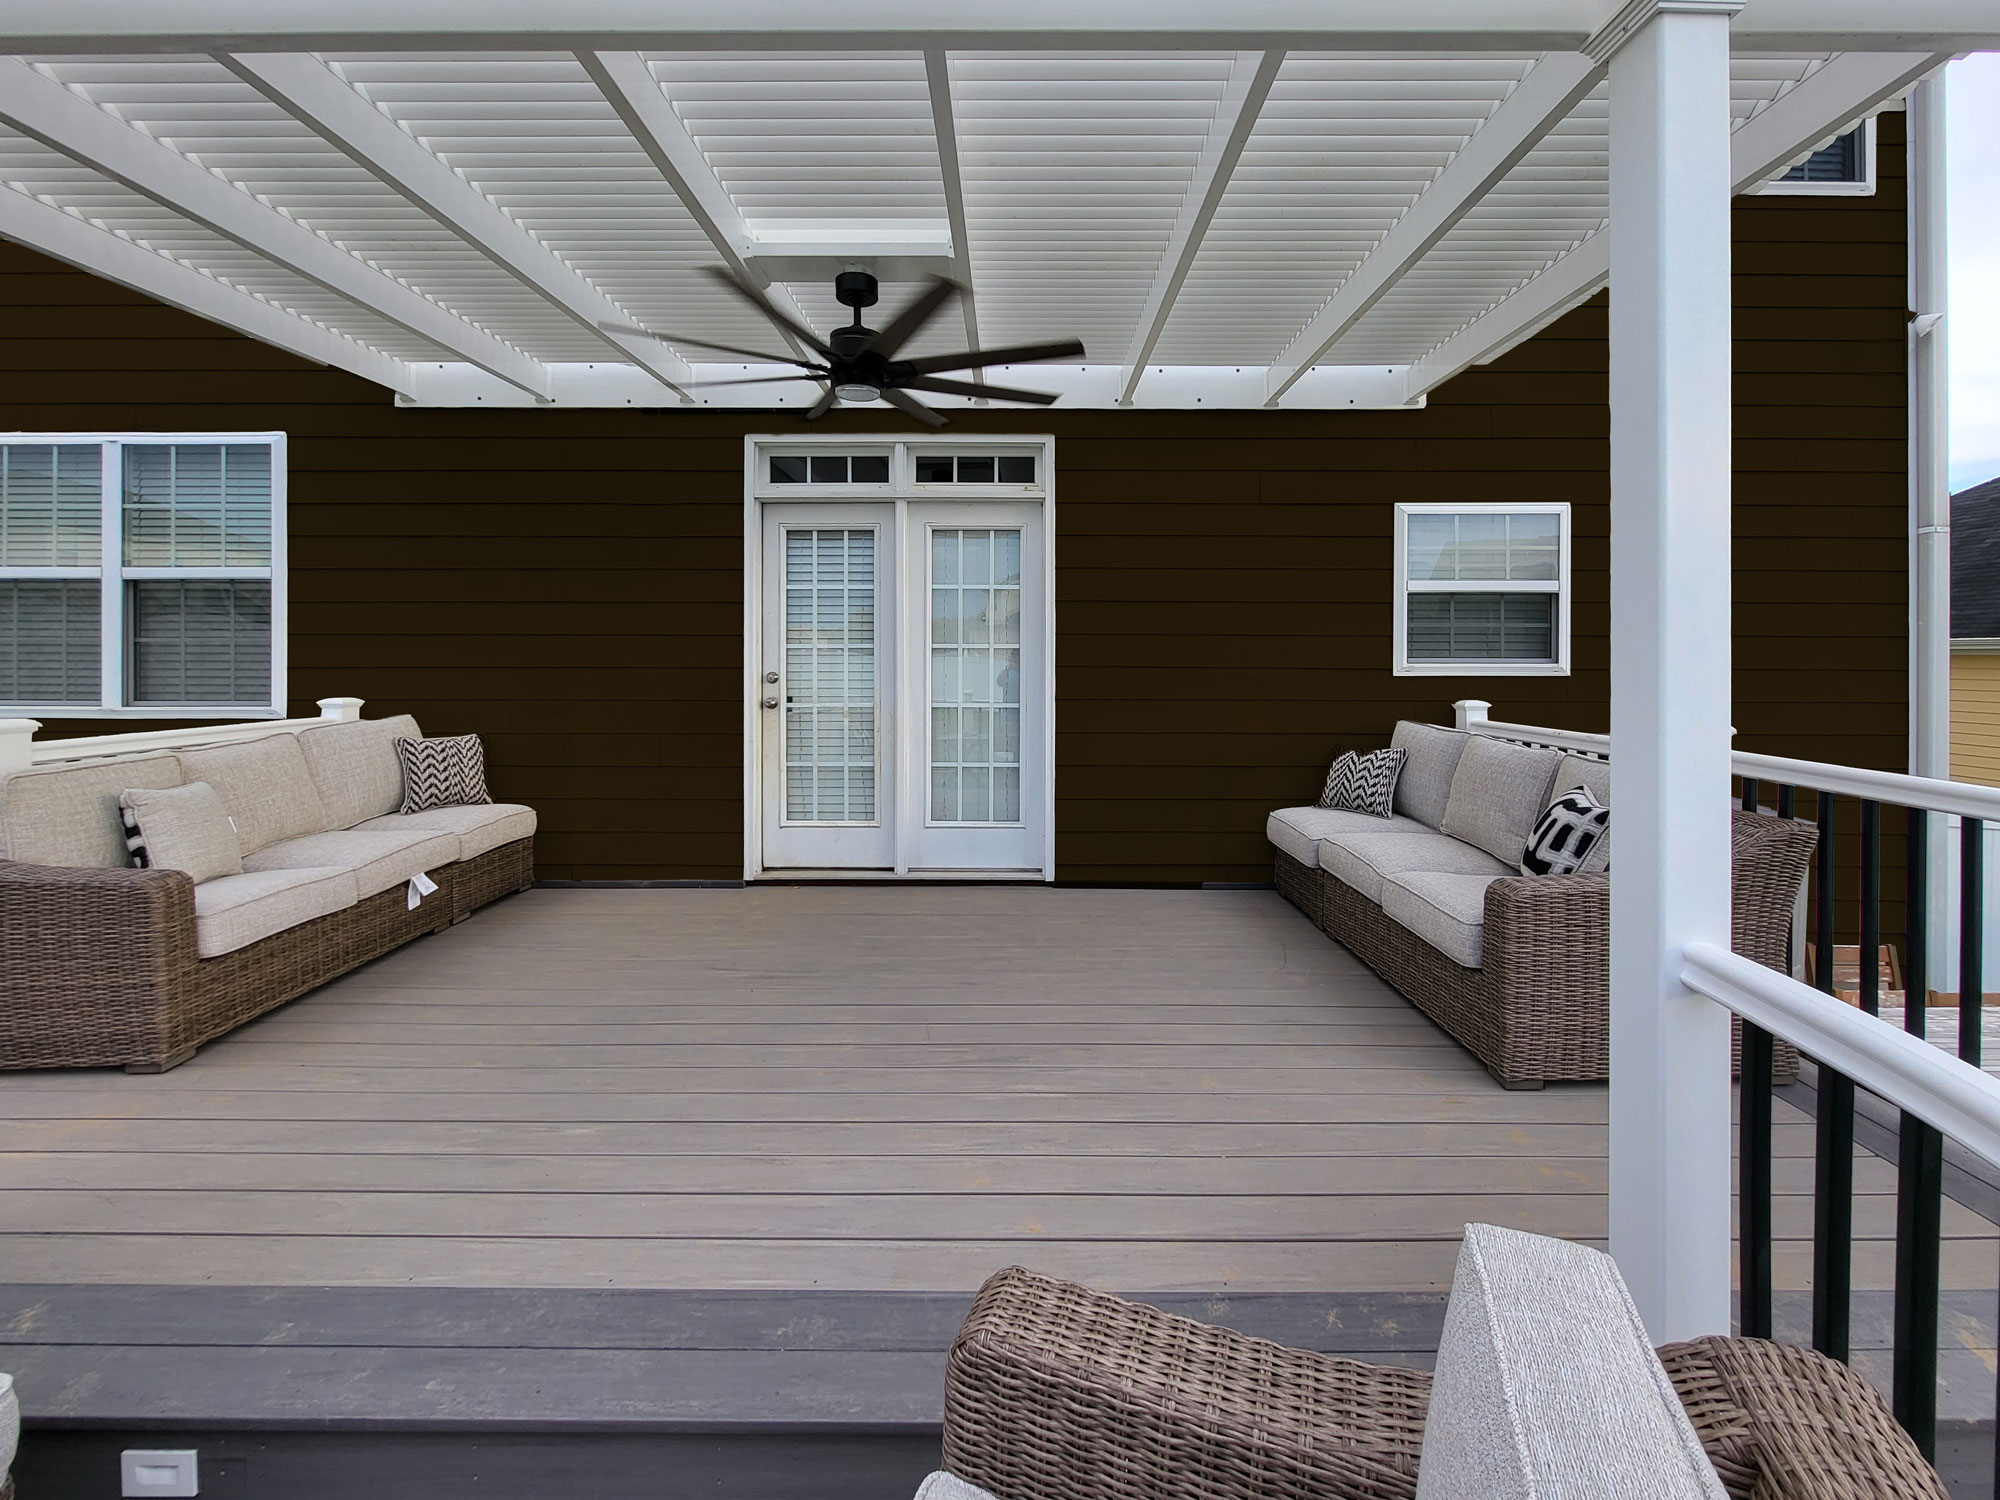 Deck pergola with a outdoor ceiling fan